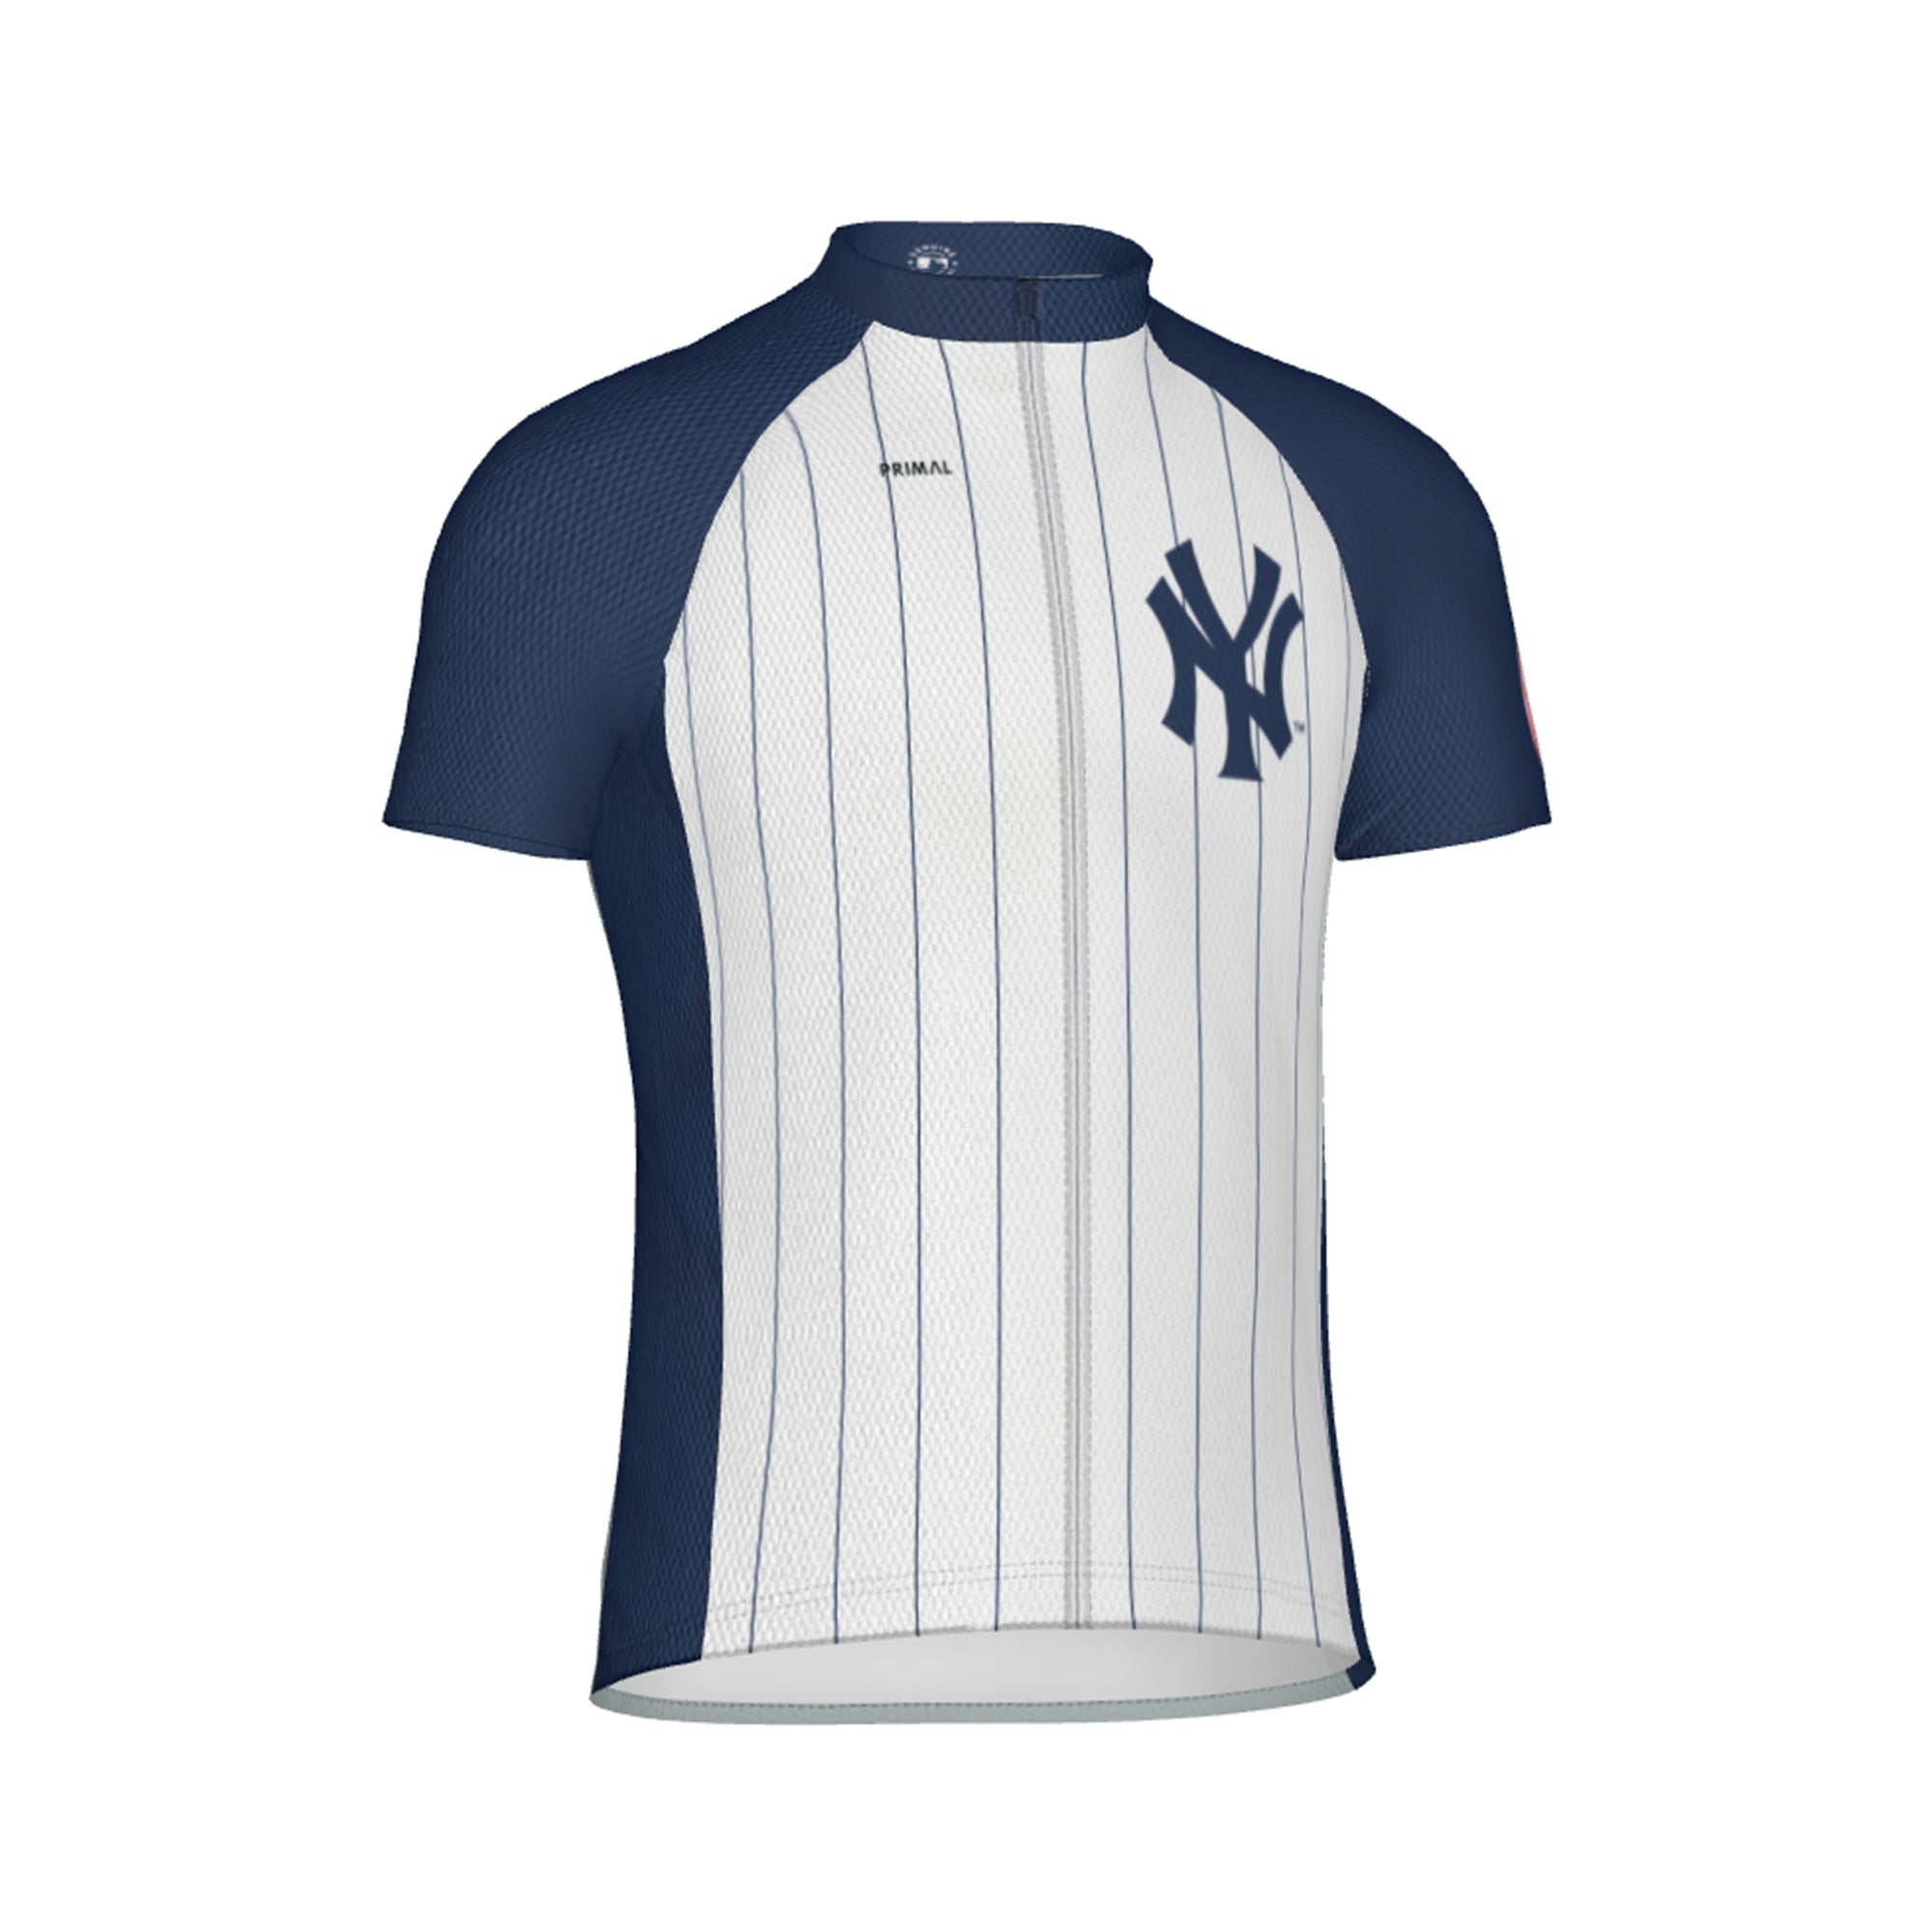 NEW YORK YANKEES BASEBALL JERSEY COLLECTION!!! 